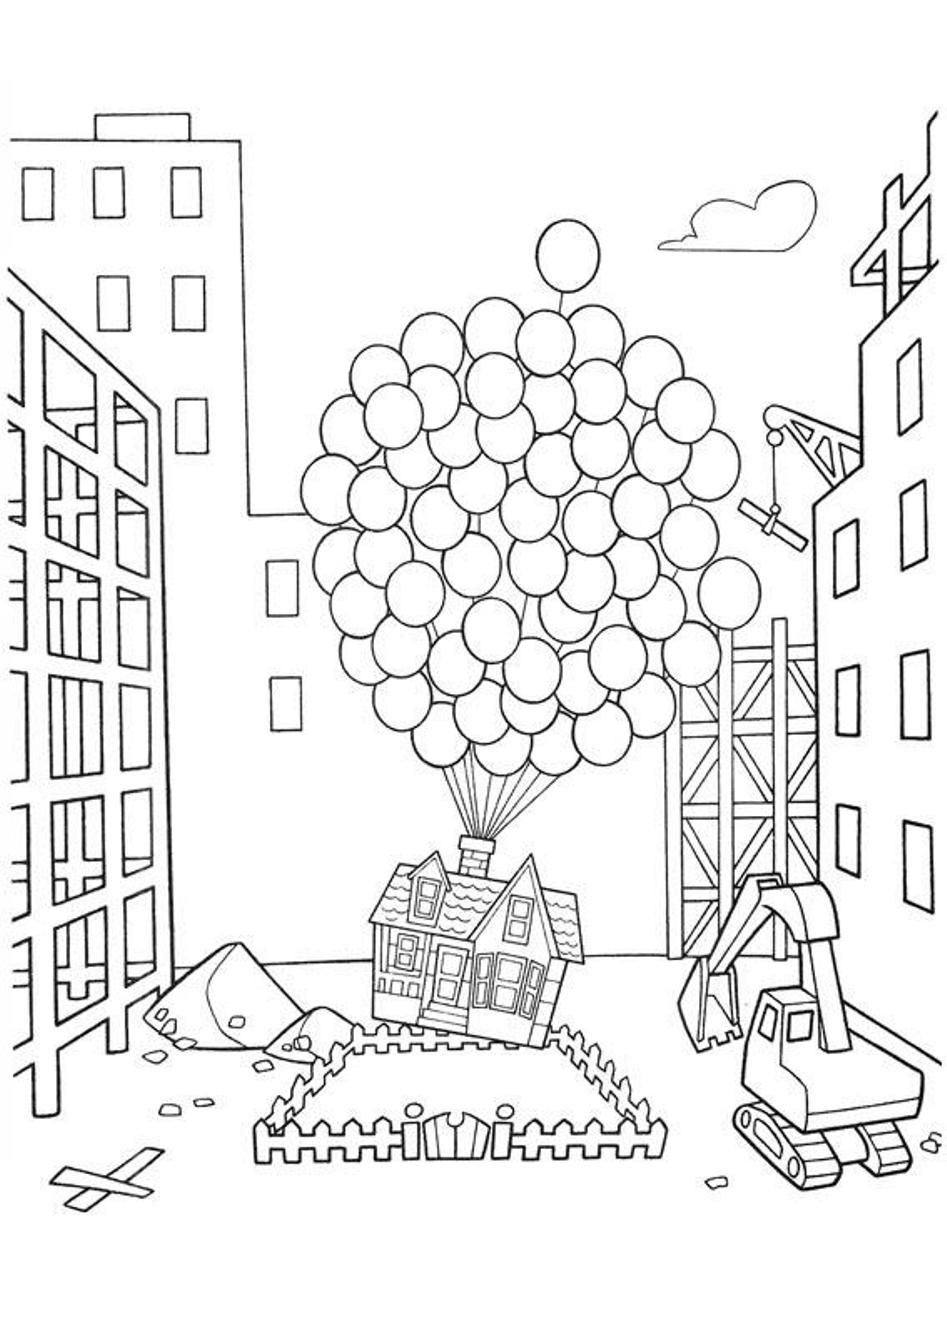 Up Coloring Pages : Up Coloring Pages Printable. Up Coloring Pages ...